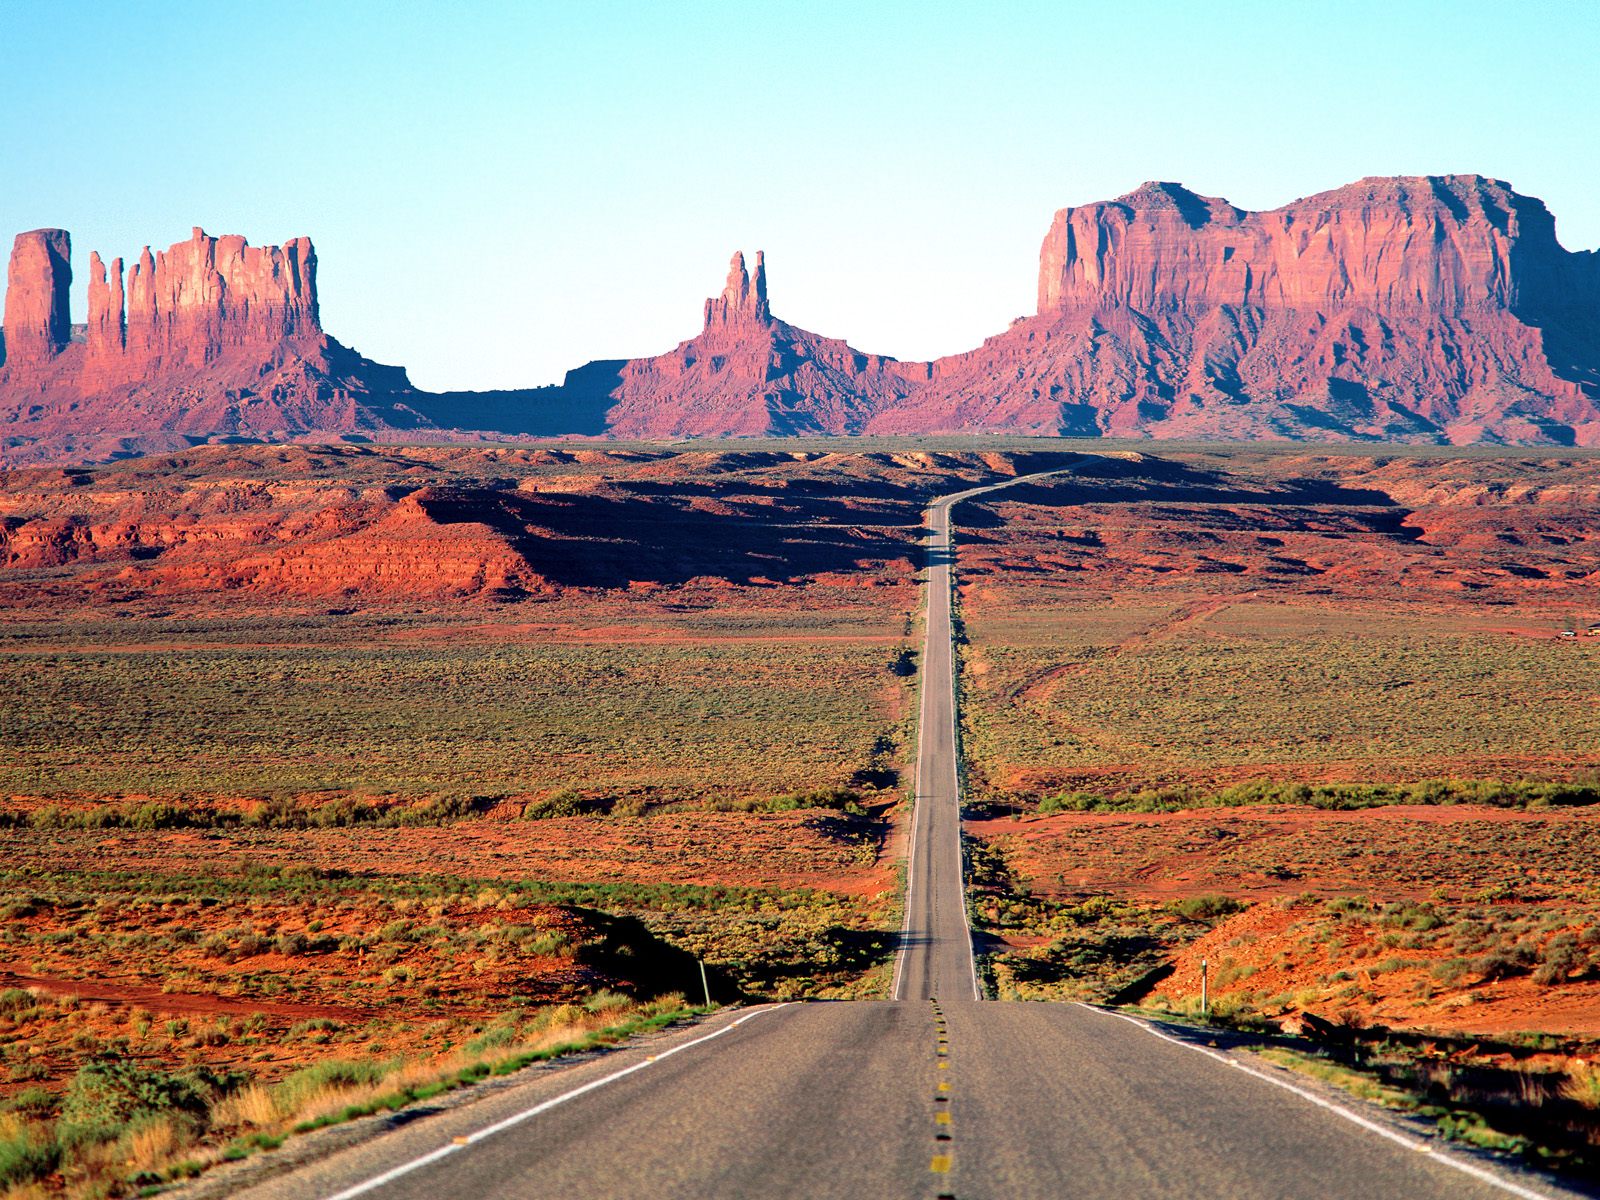  Valley Arizona   Scenic Wallpaper Image featuring Roads And Paths